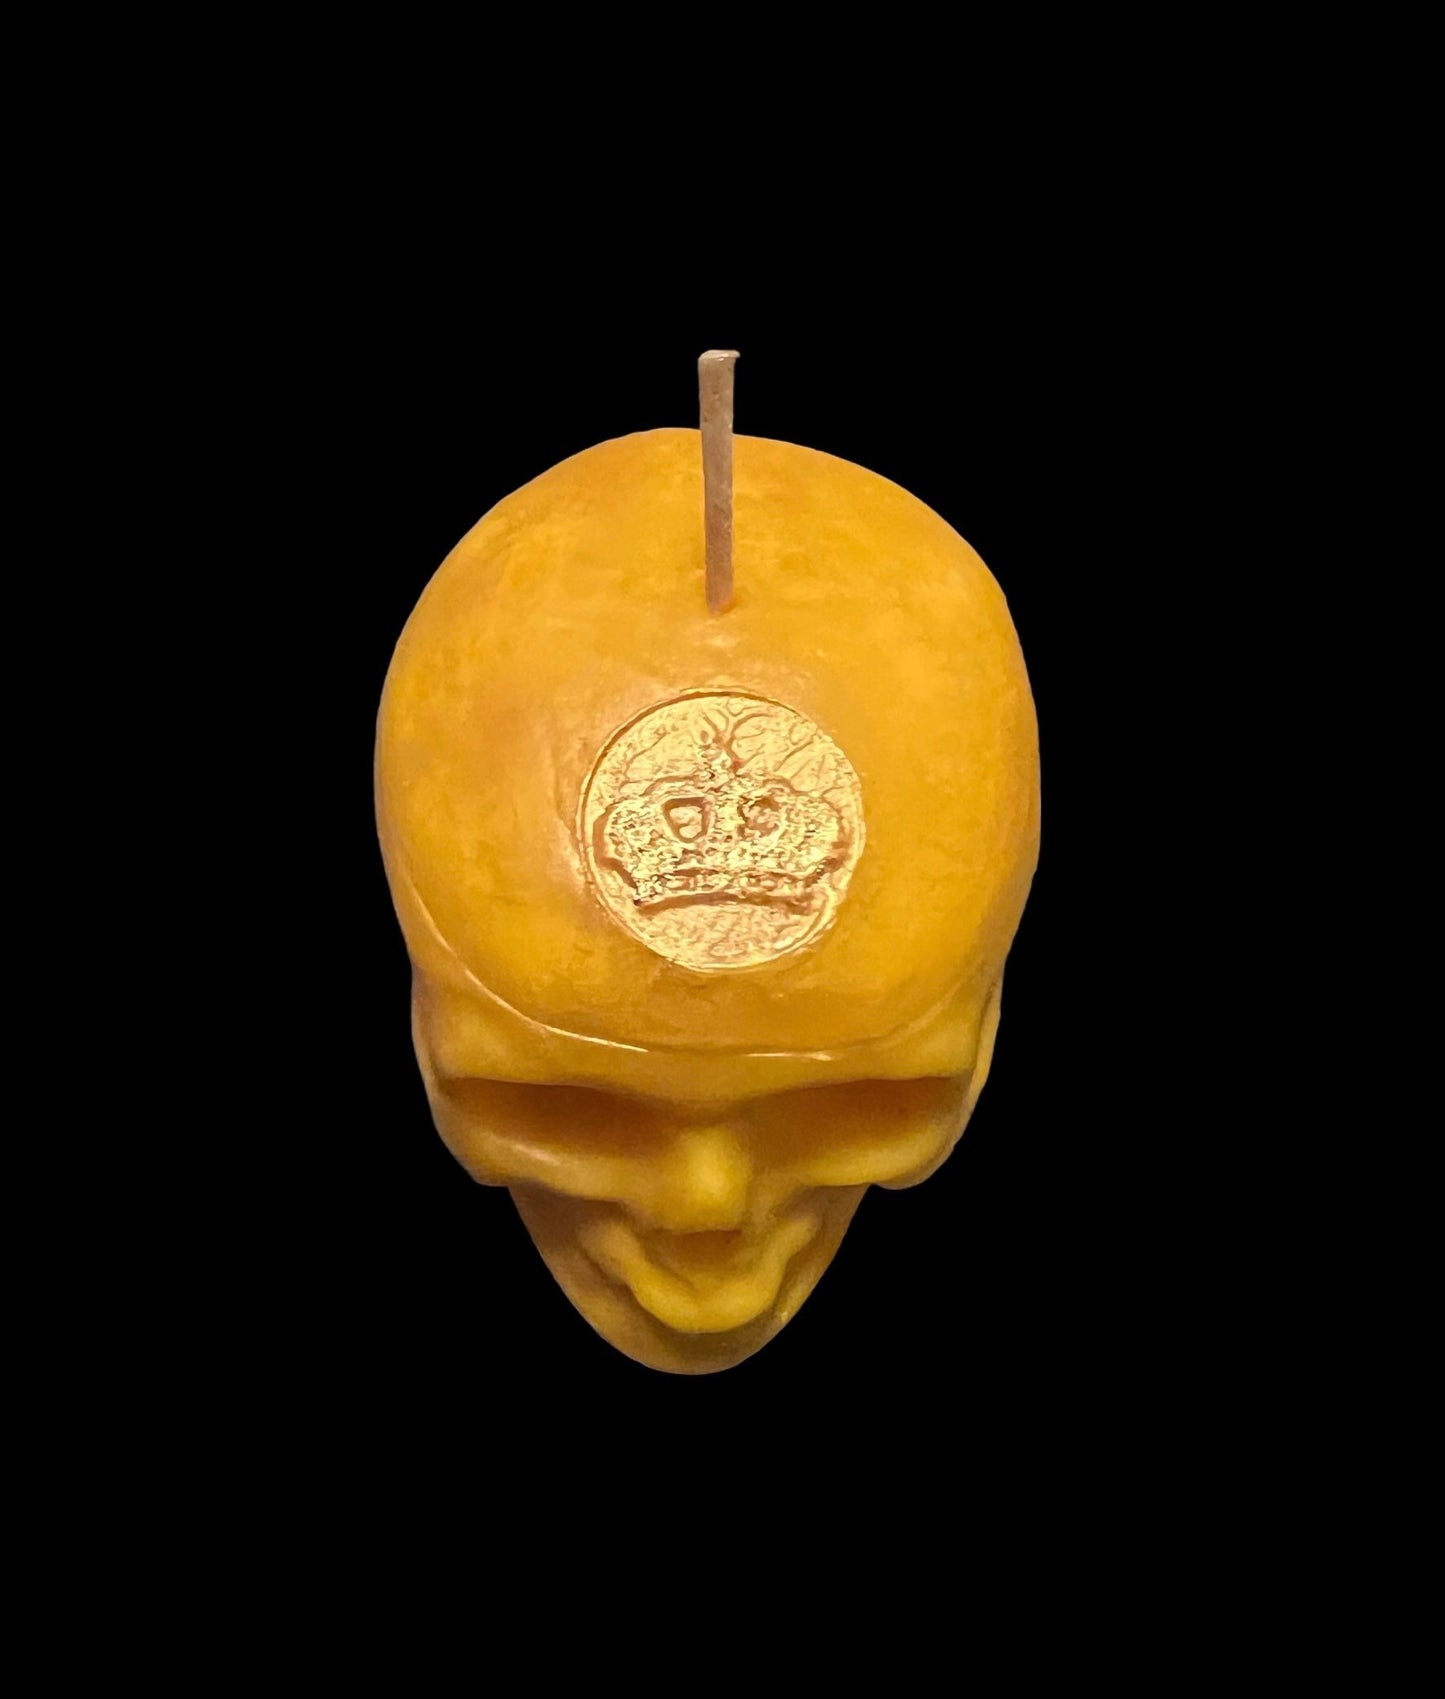 Fixed Loadable Skull Candle with Imprint + 24K Gold + Sterling Silver + Influence Thoughts + Mental Health